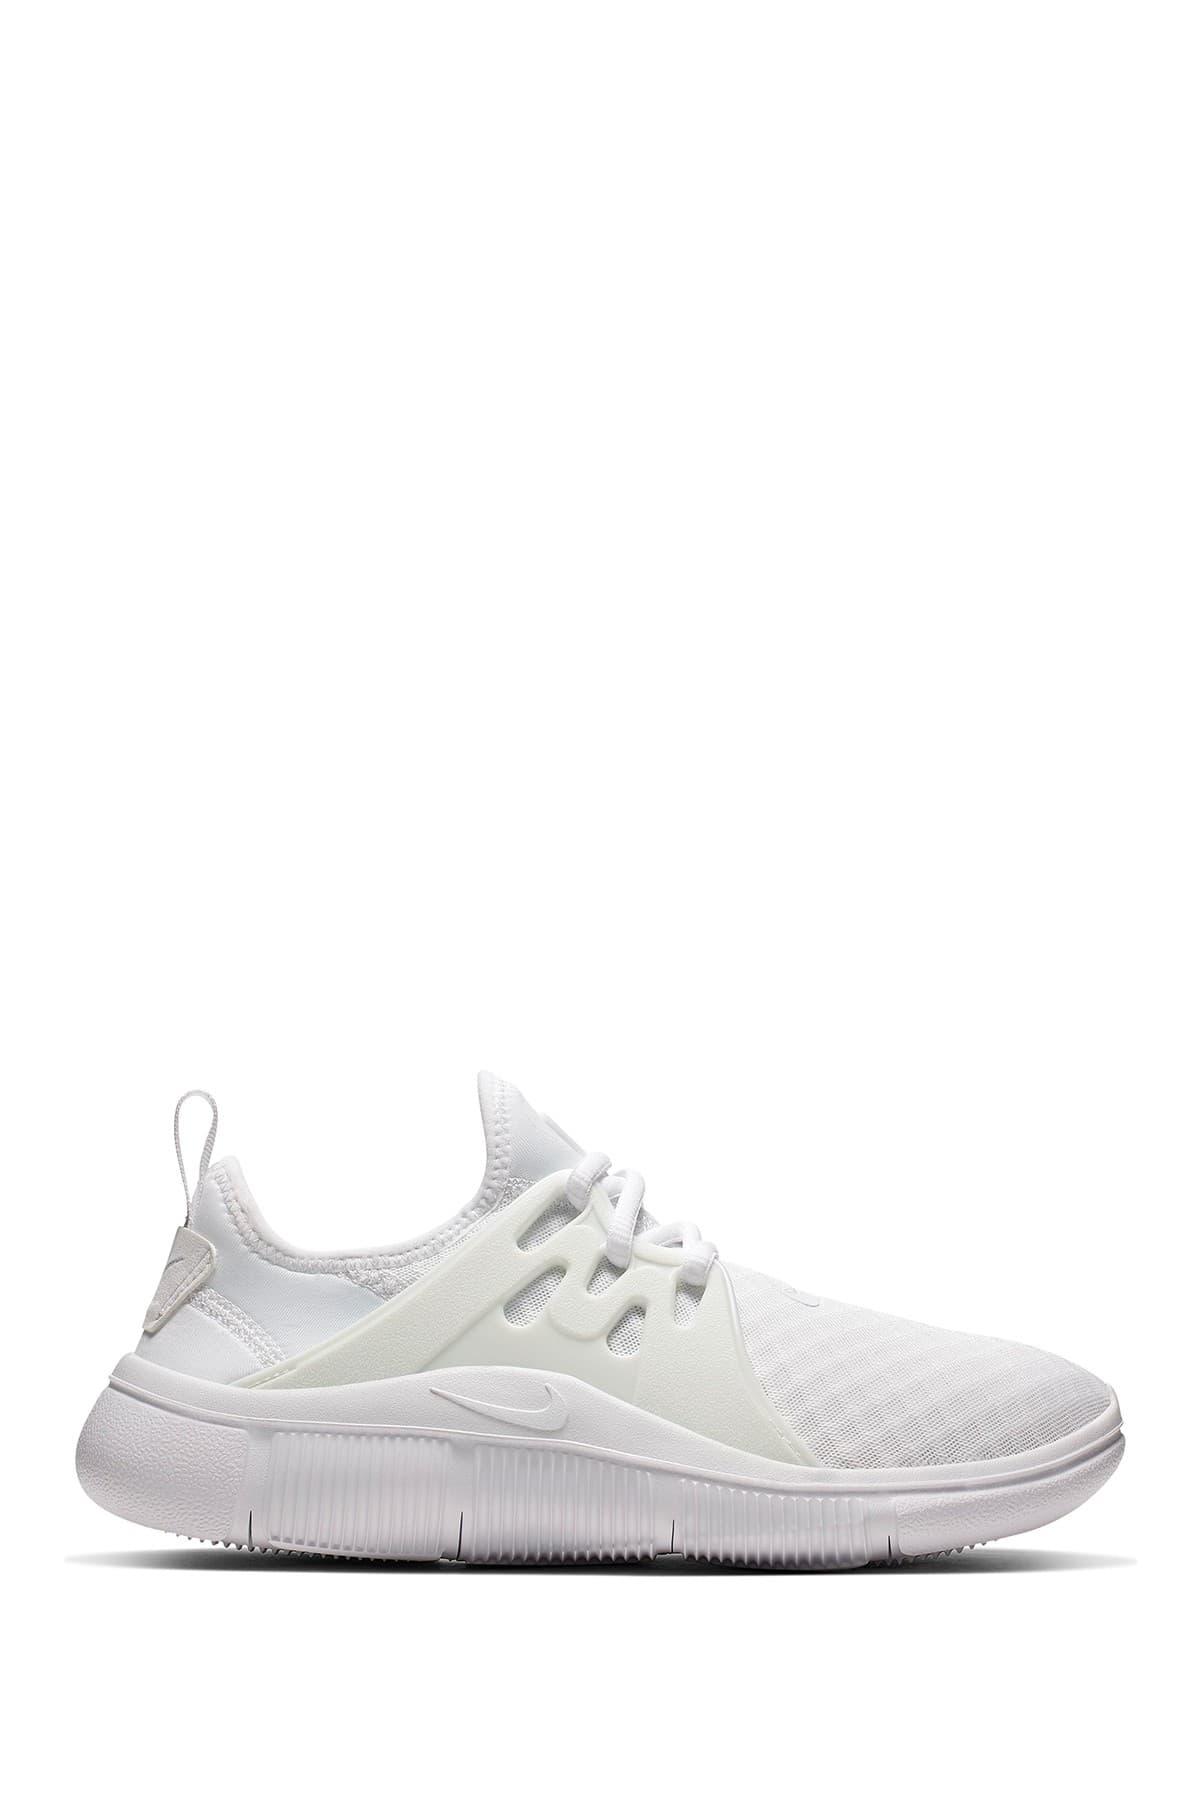 Nike Acalme All White Switzerland, SAVE 42% - aveclumiere.com